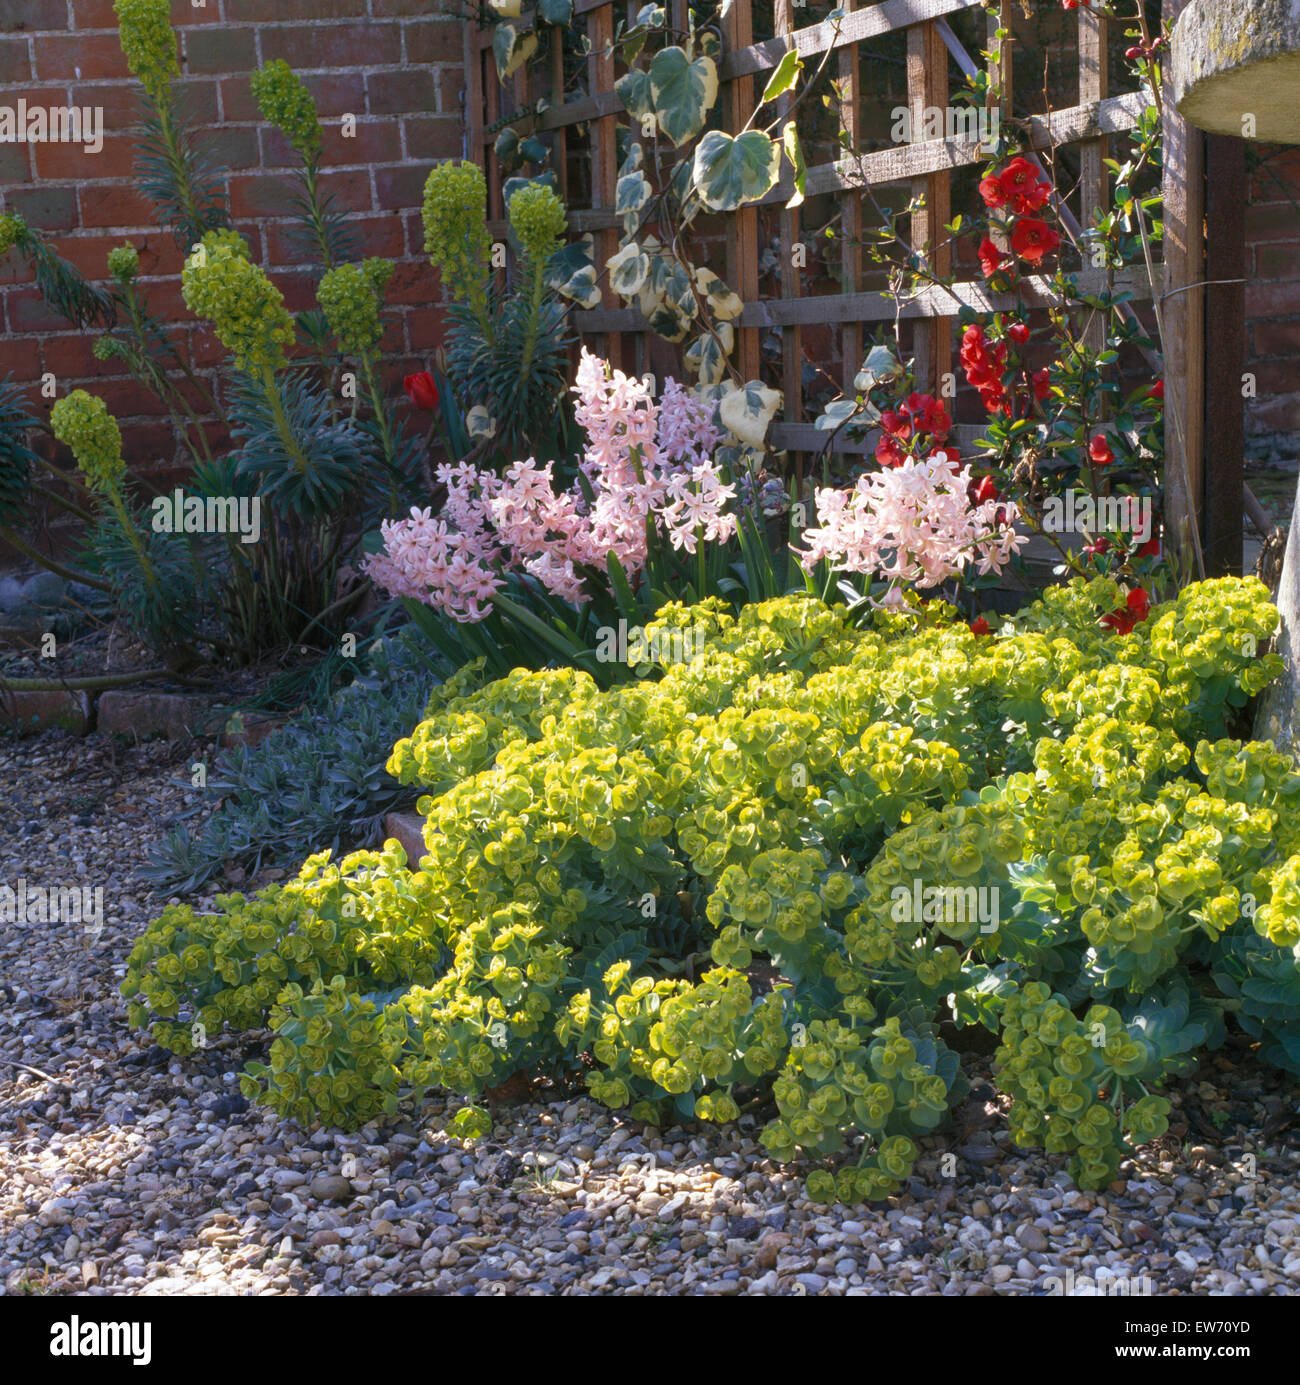 Euphorbia 'Characias' and pink hyacinths with red chaenomeles 'Japonica' in spring garden Stock Photo